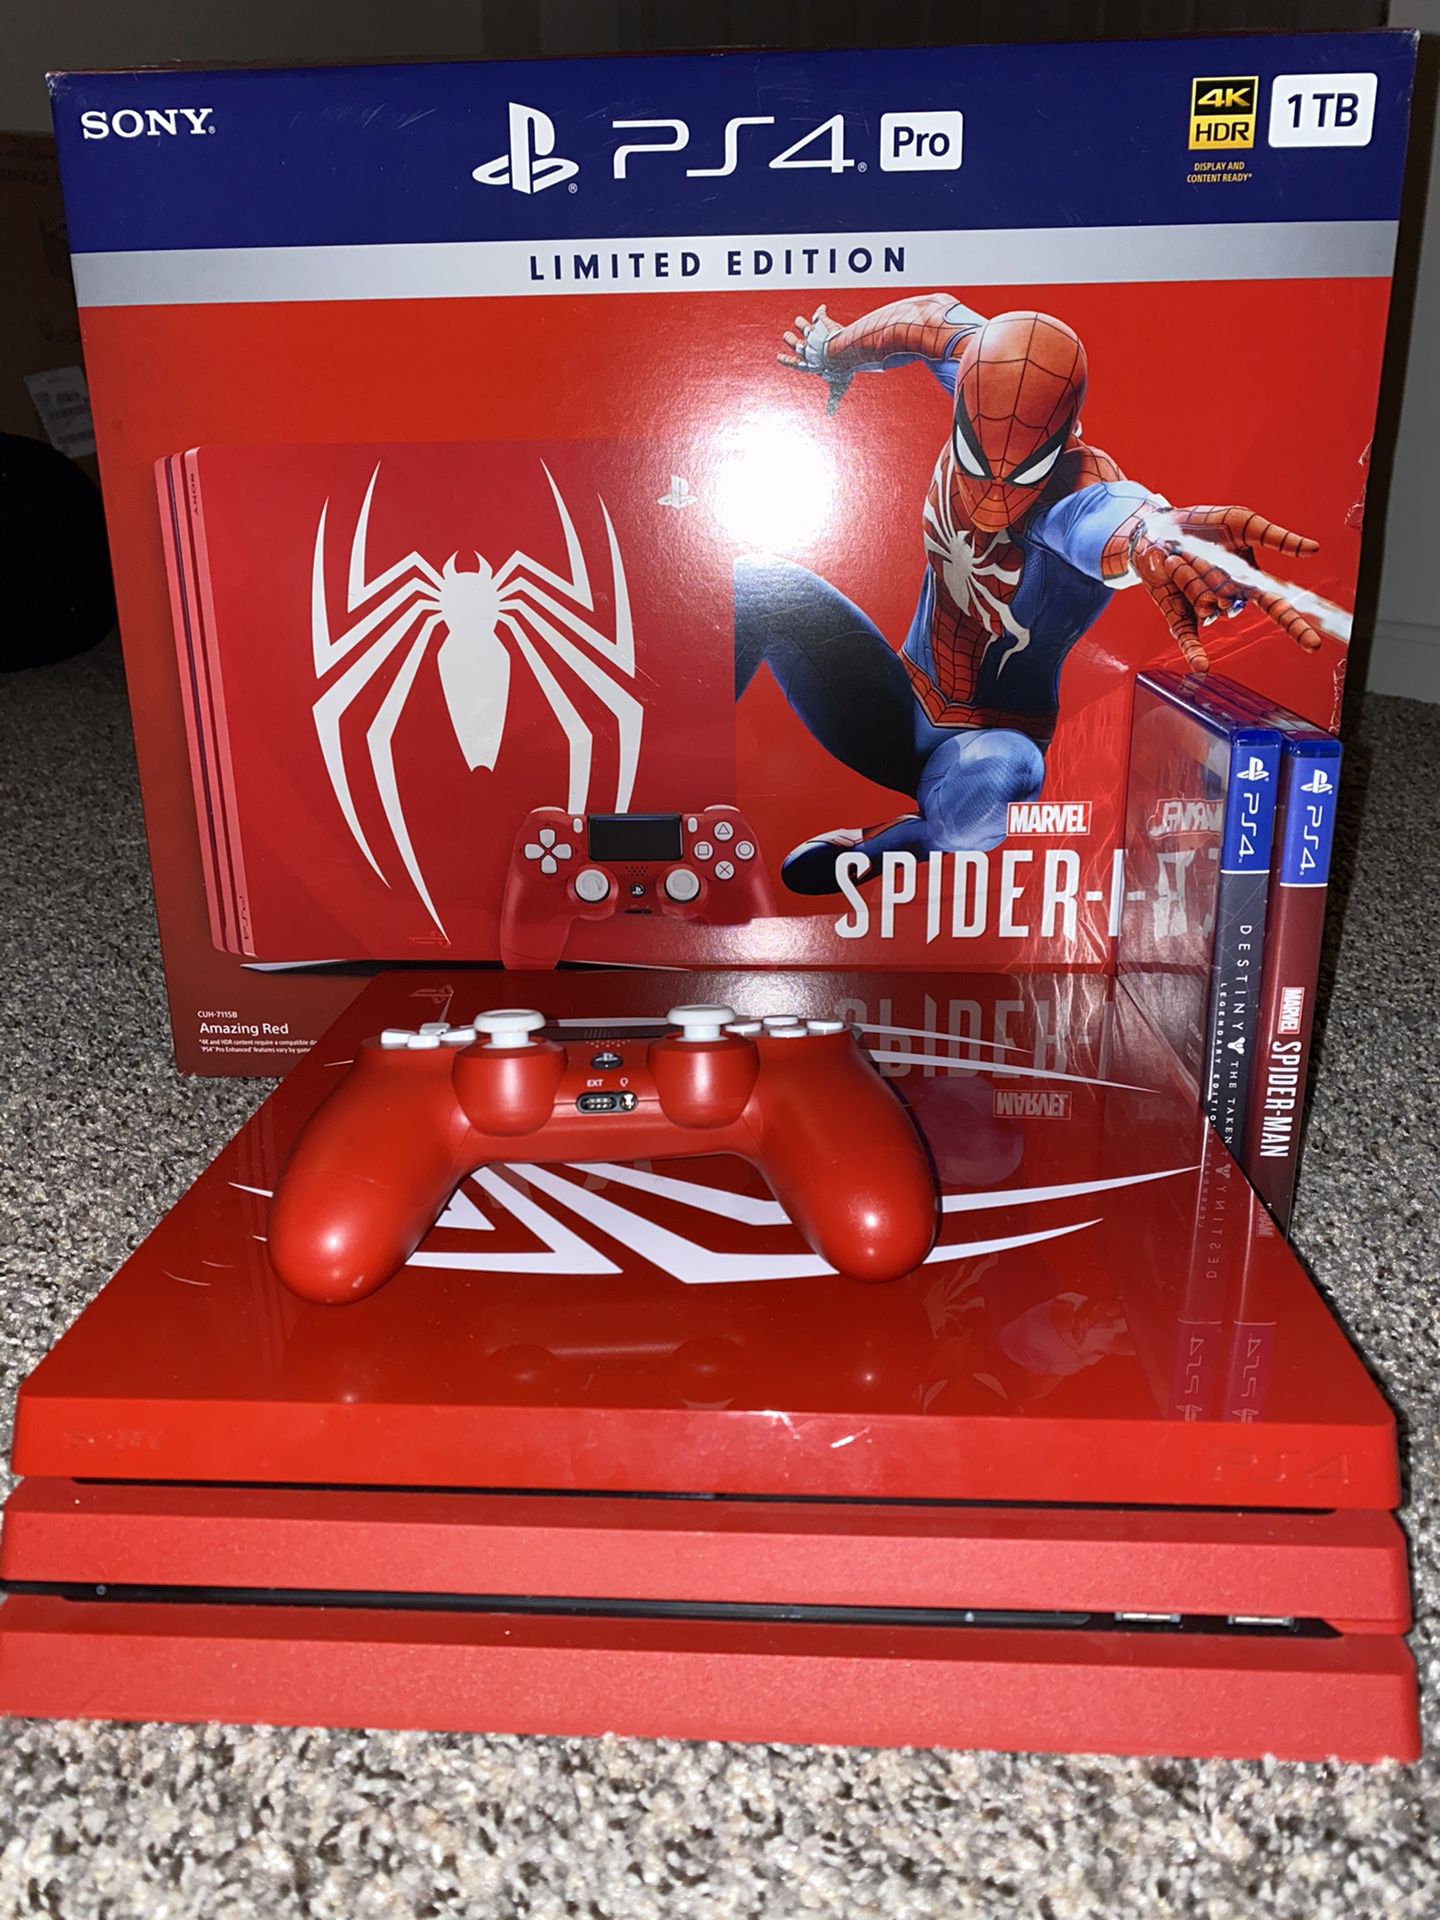 PS4 Spider-Man Limited Edition Console with Spider-Man & Destiny Game